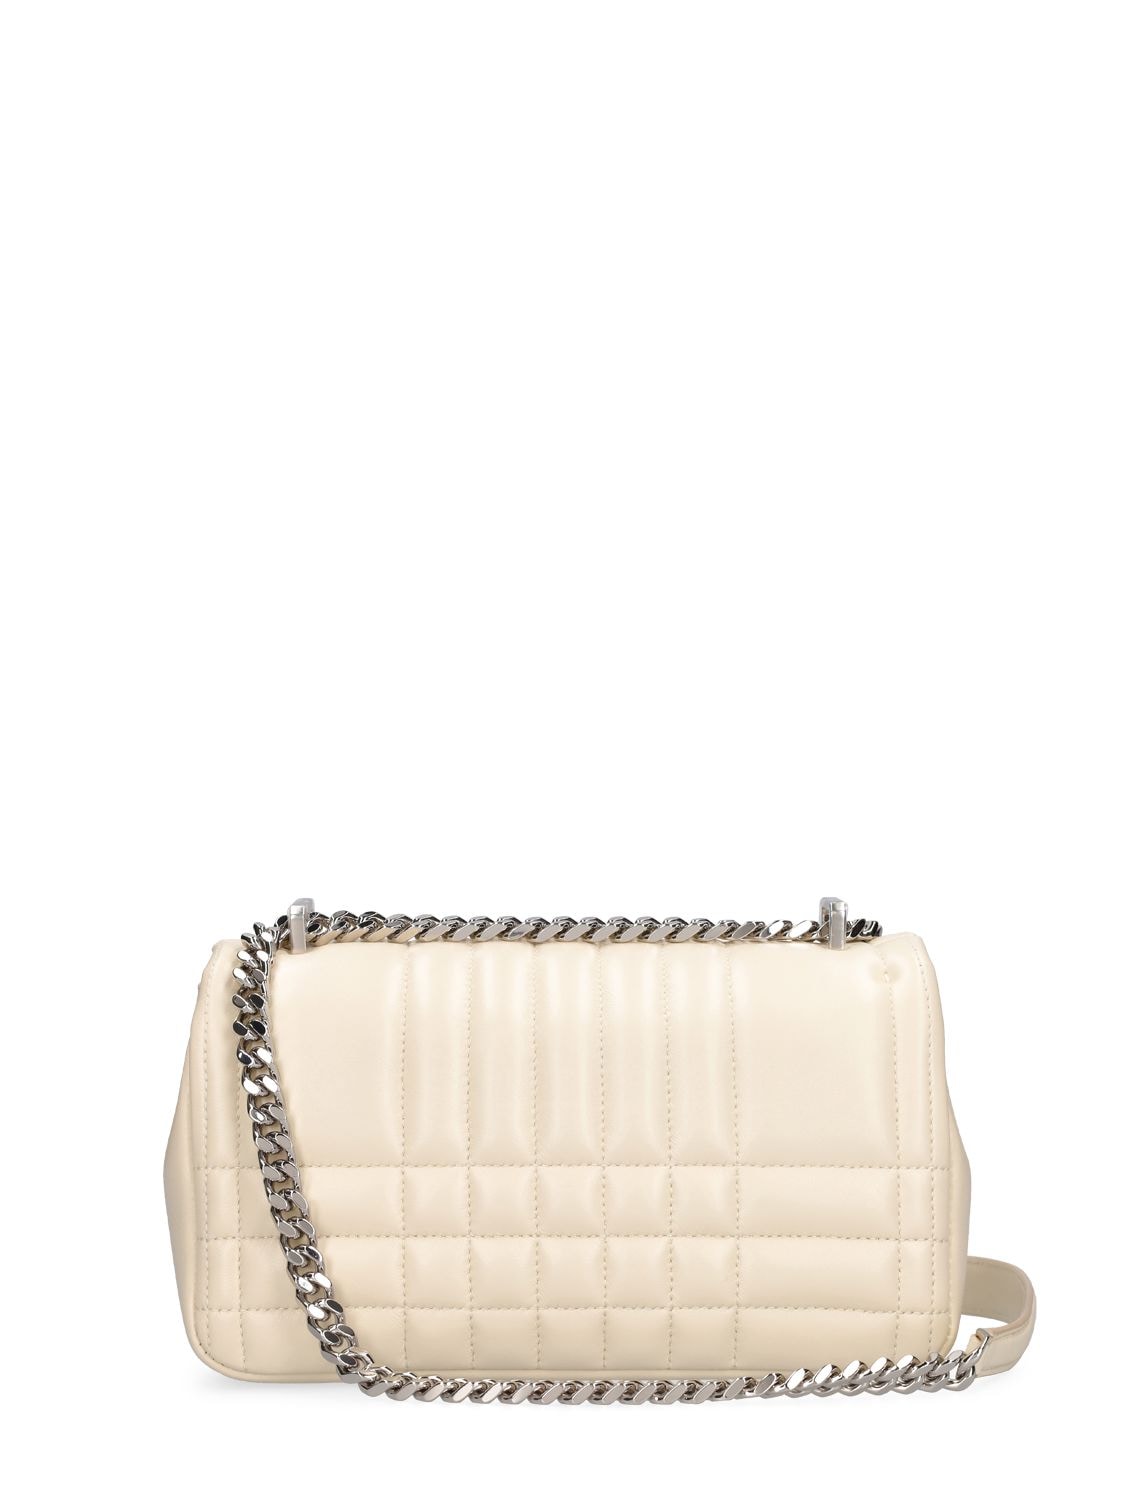 Shop Burberry Small Lola Leather Shoulder Bag In Pale Vanilla